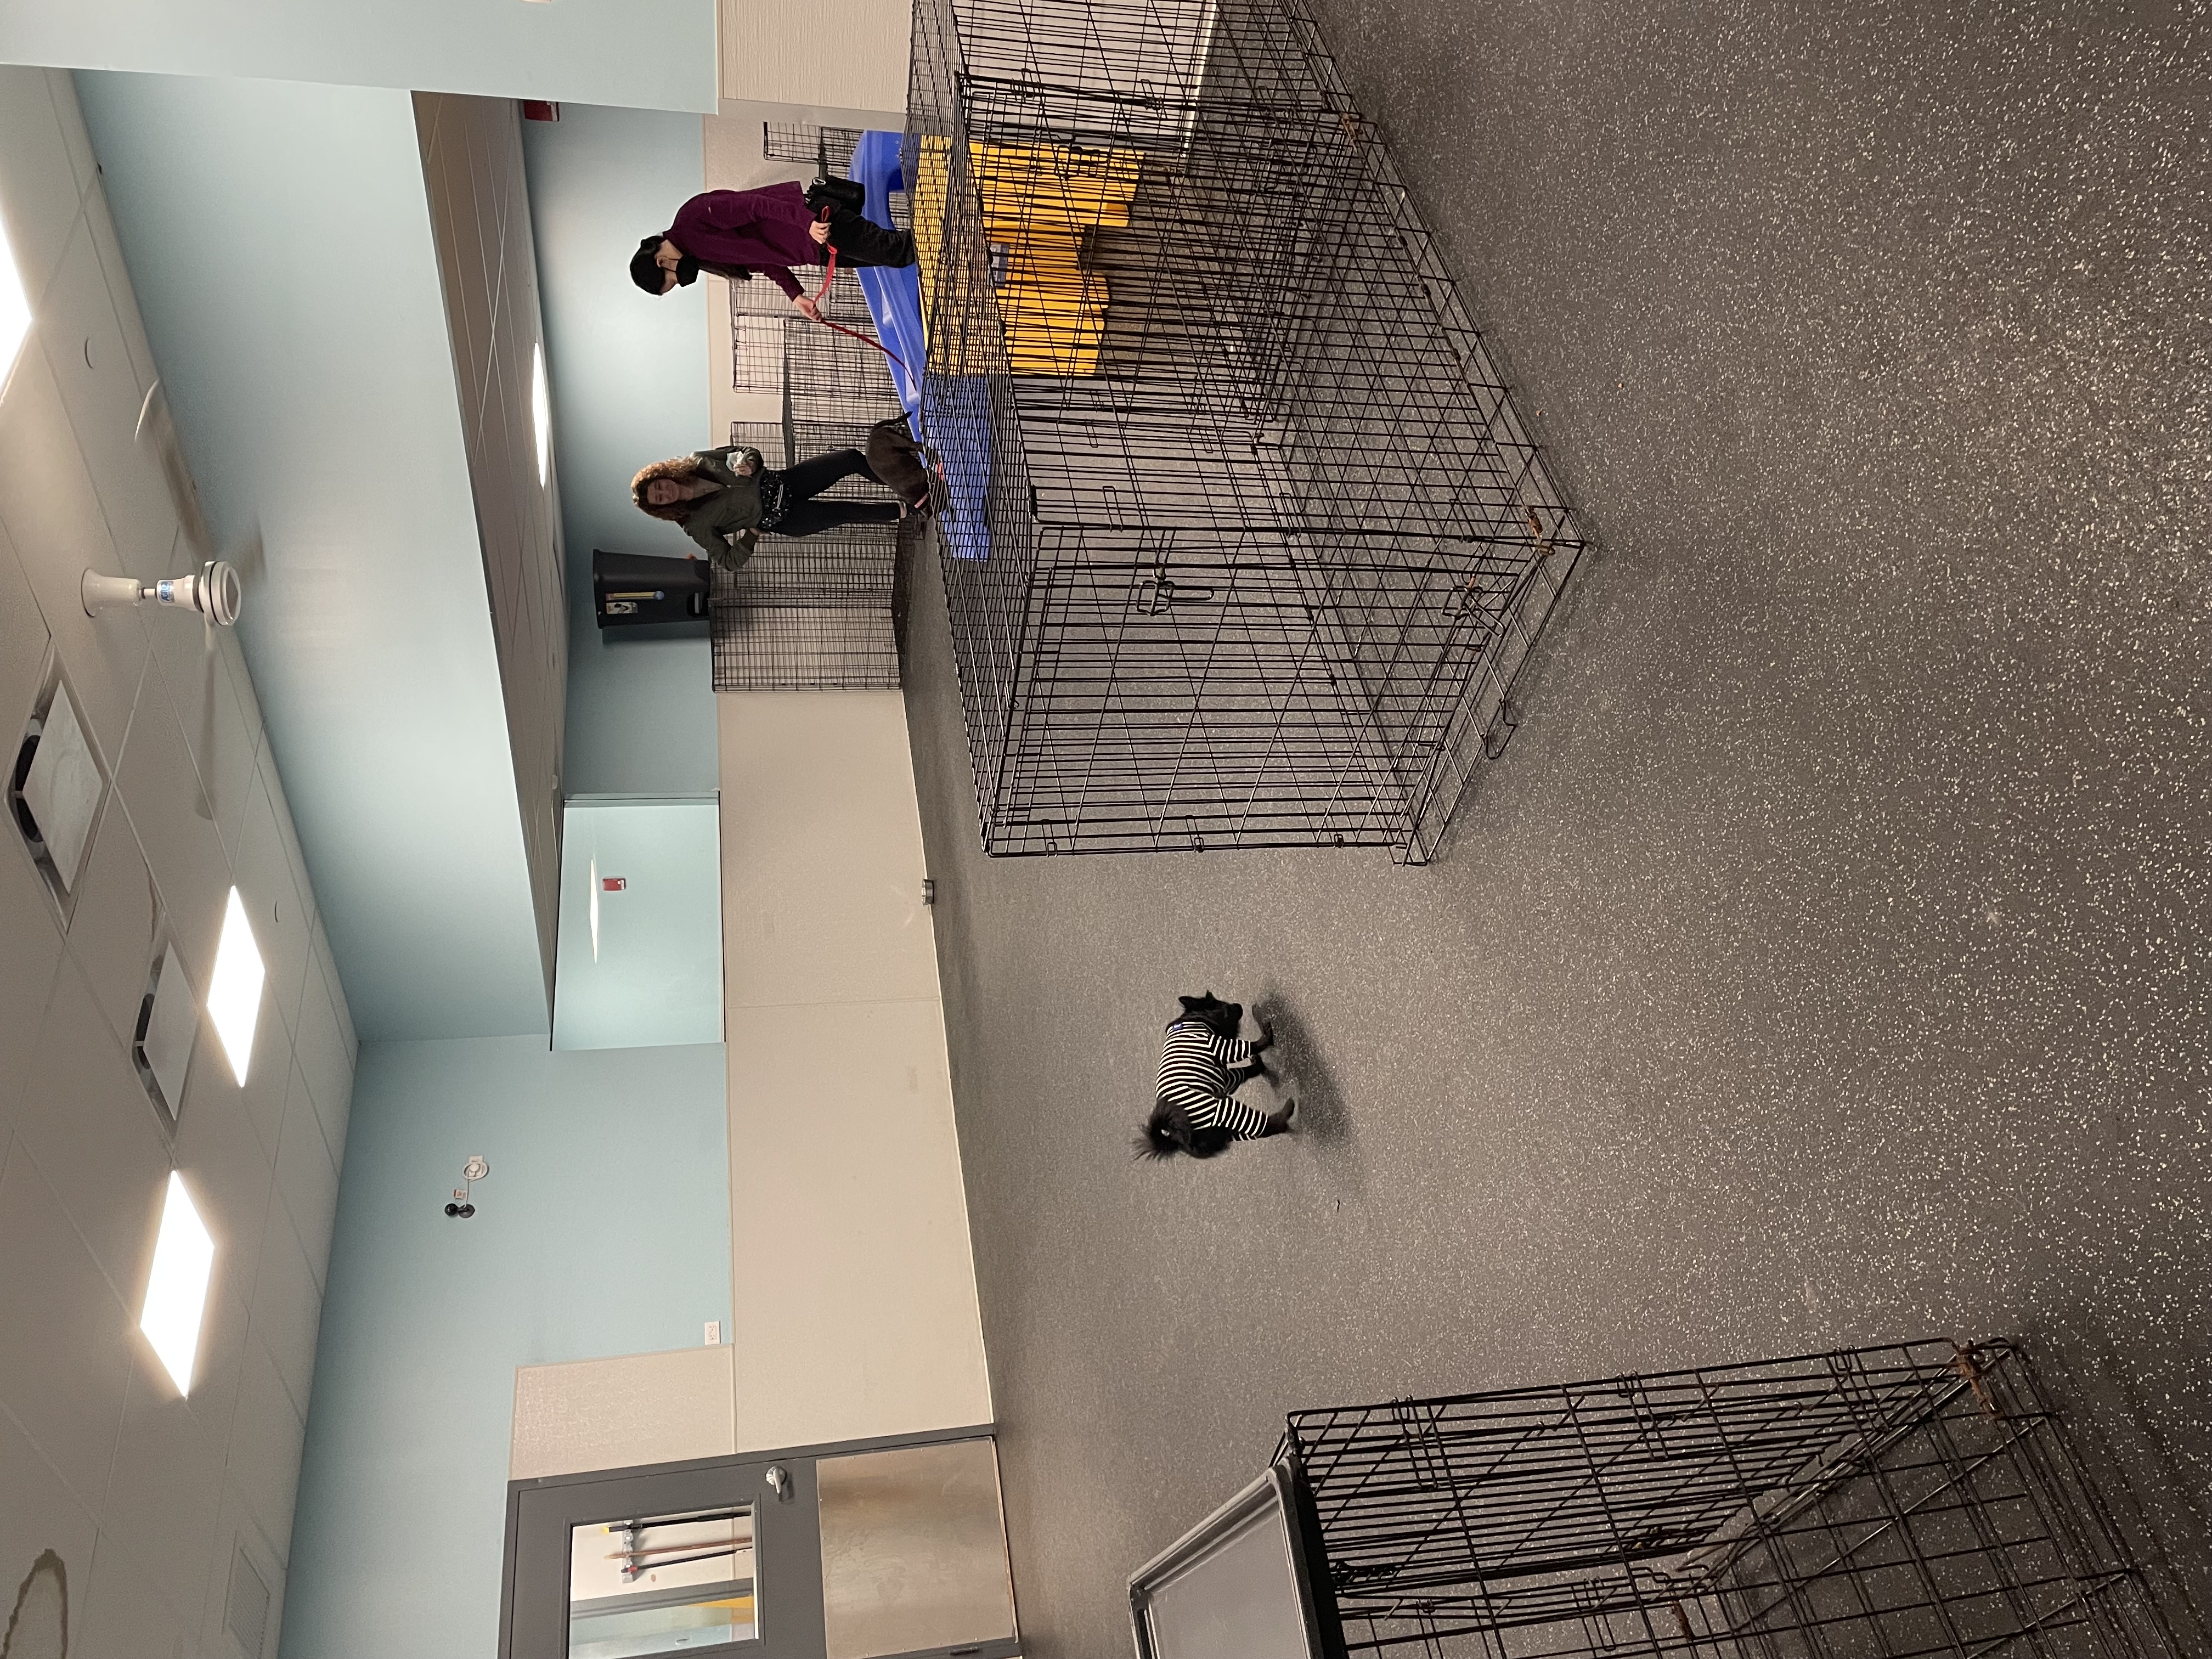 A large dog daycare room with empty dog crates. A small black dog in a striped shirt walks toward a larger brown dog who is sitting on a ramp with 2 humans next to them.